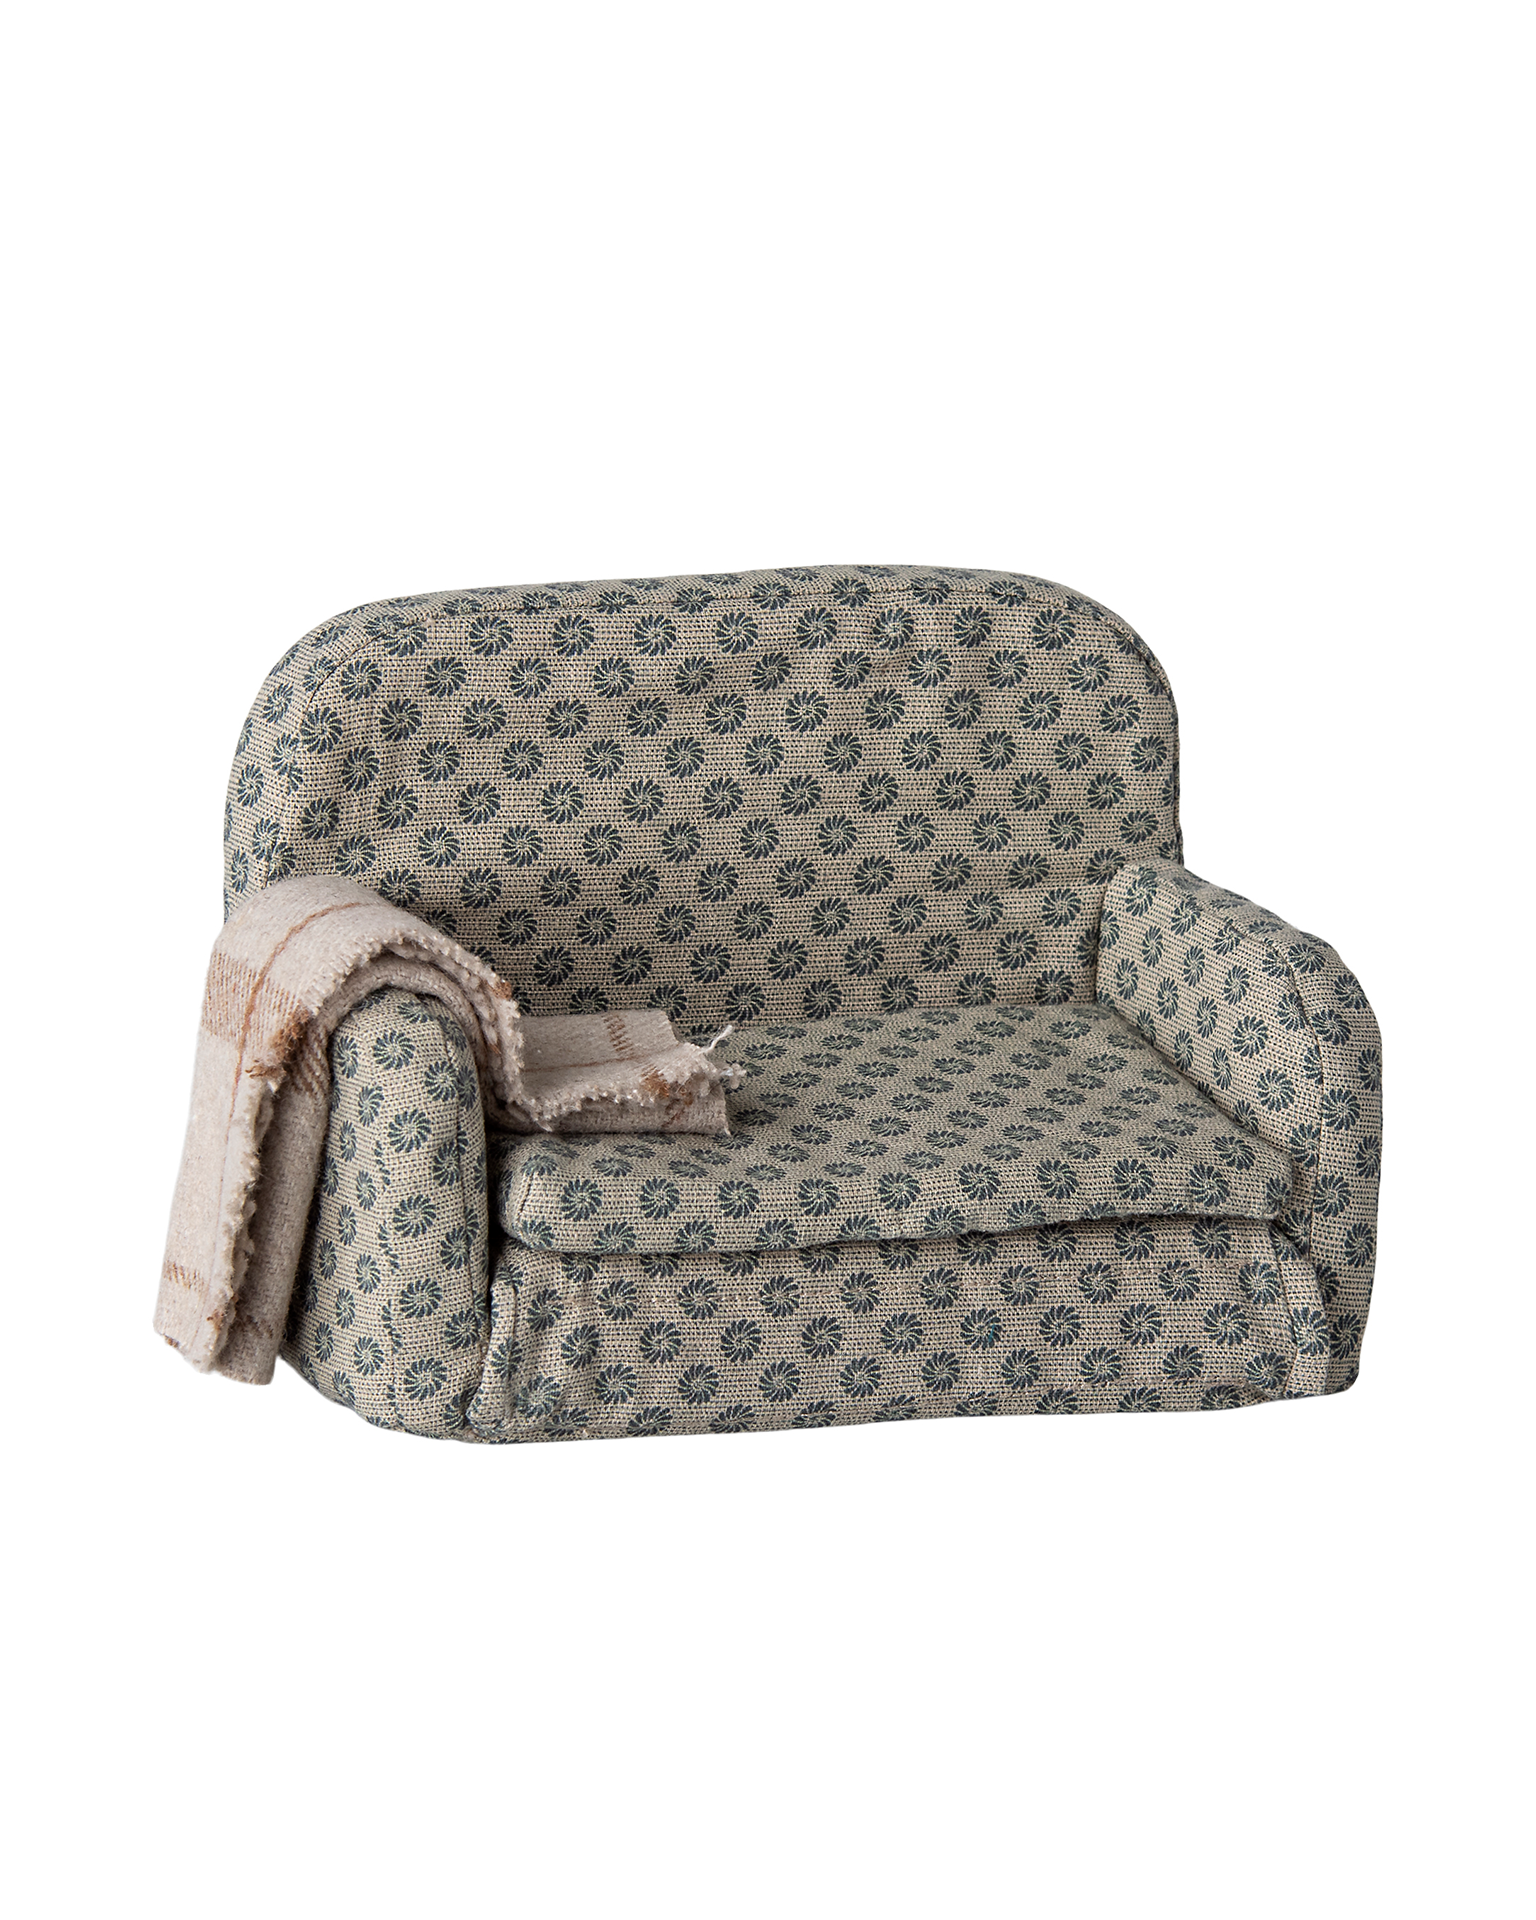 Little maileg play sofa bed